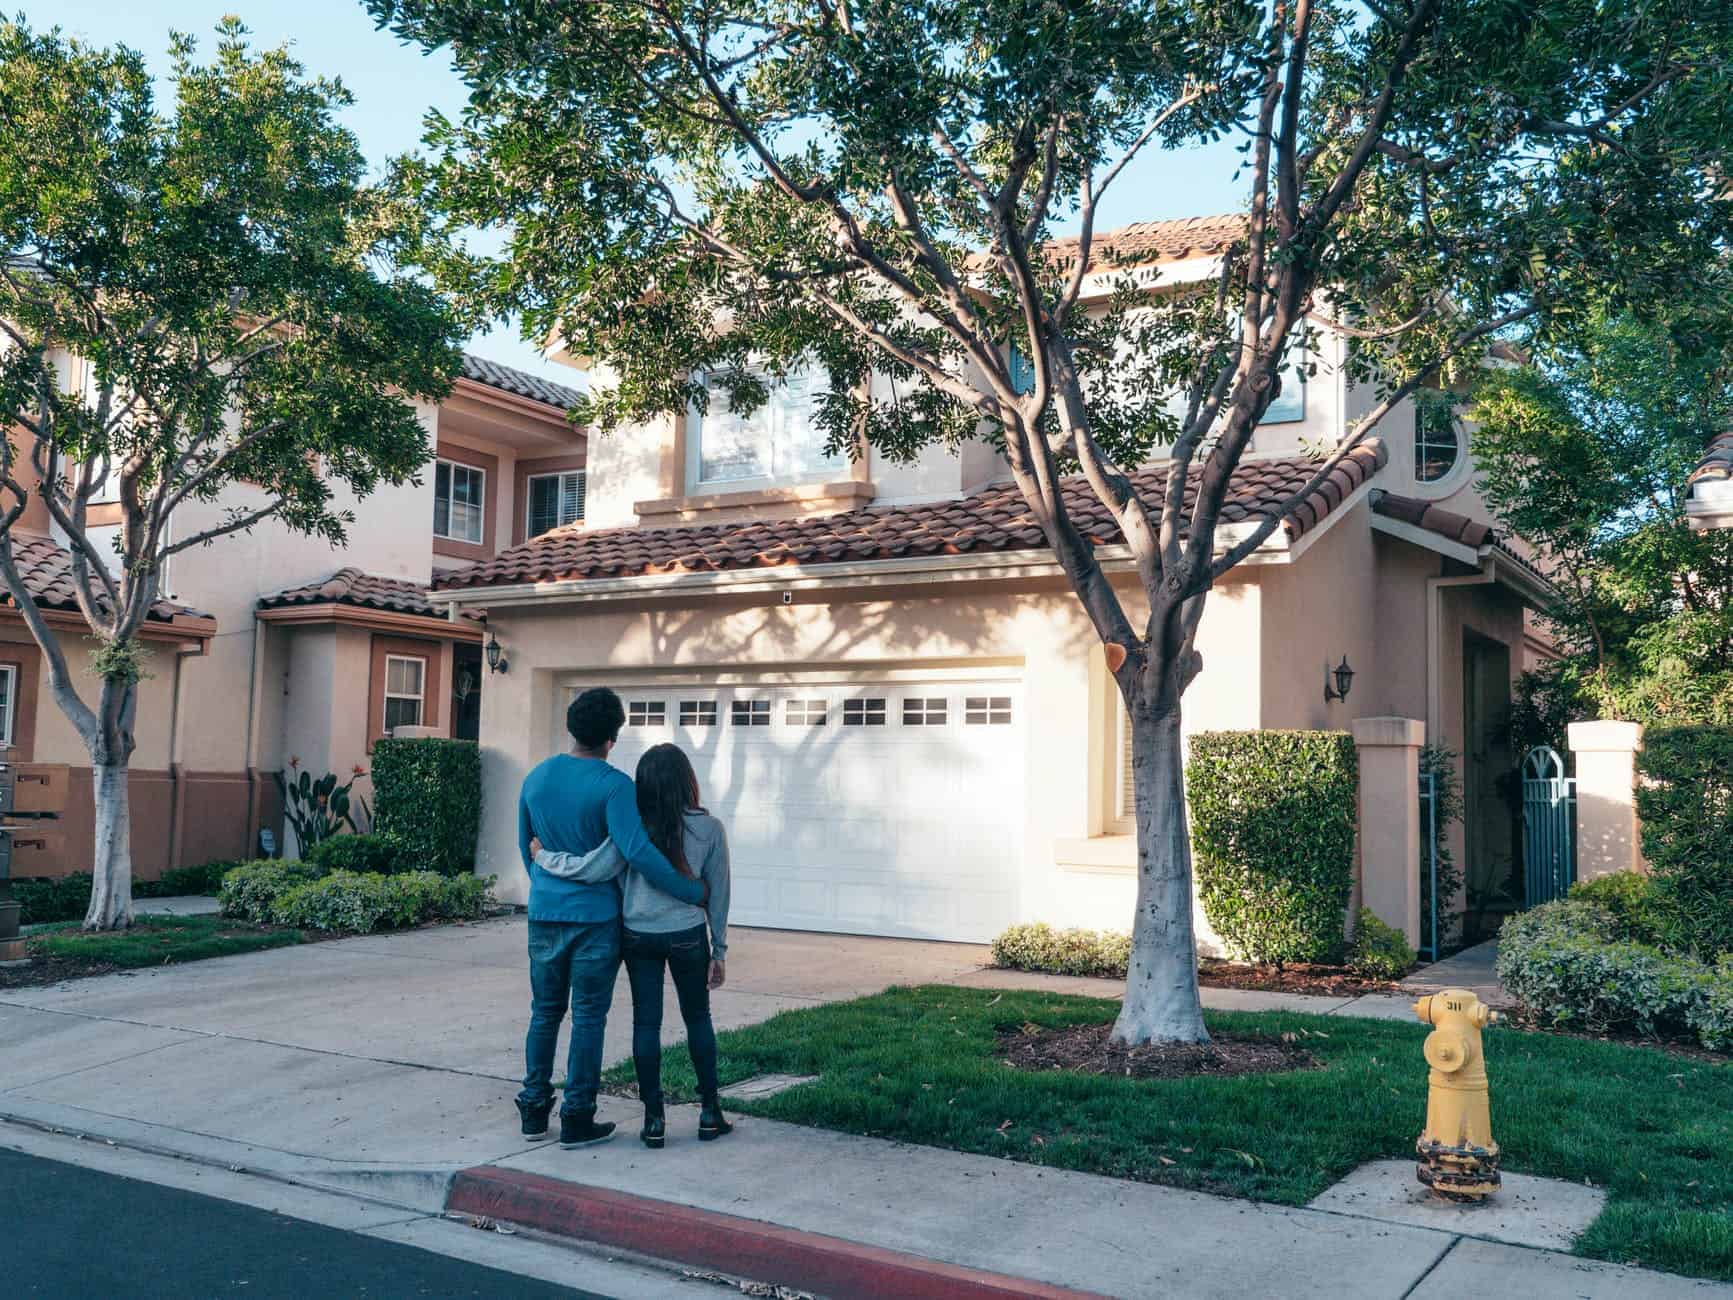 two people standing on a sidewalk holding each other while looking at the front of a house that has a tree in the small front yard next to the driveway